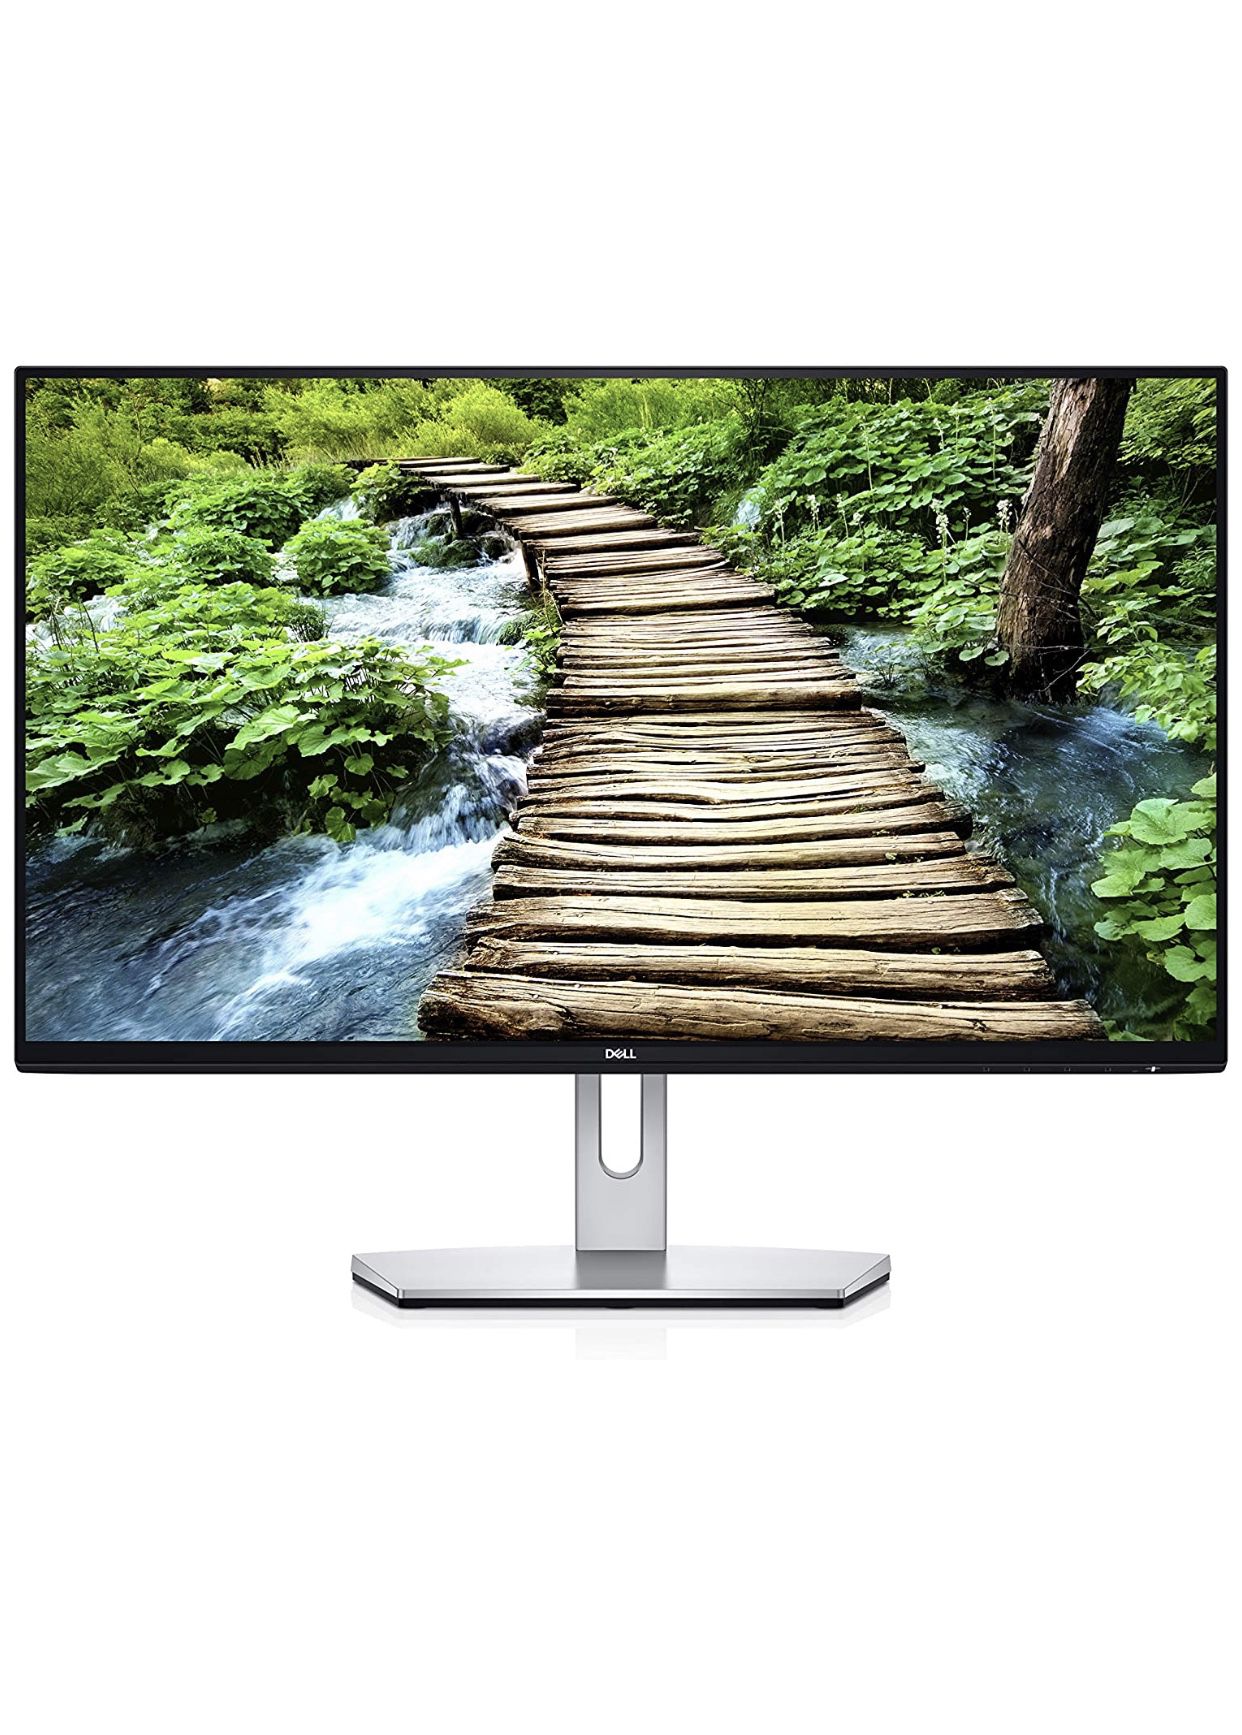 Dell Monitor 24” 1080p HDMI Model: S2419H | 2 Available